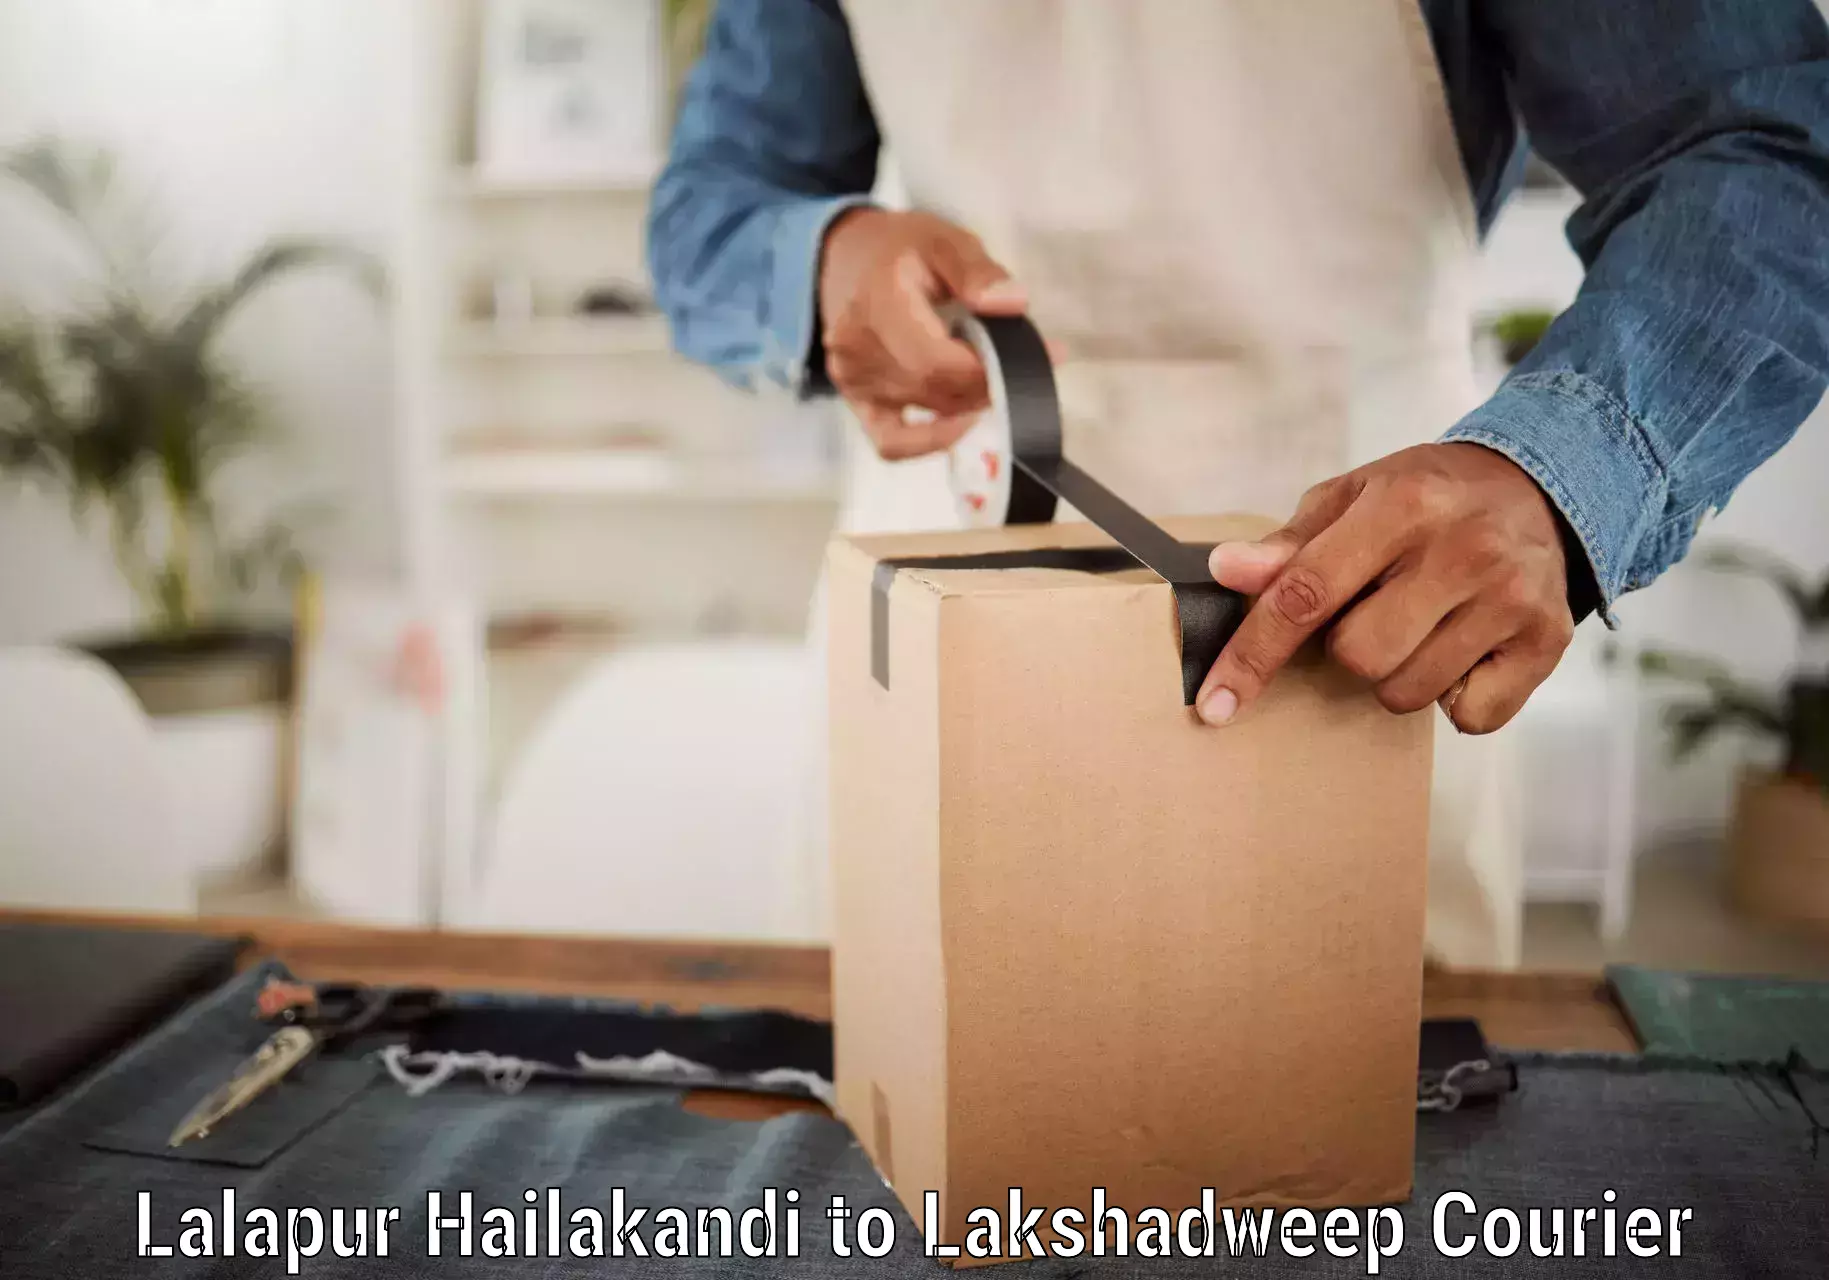 Reliable courier services Lalapur Hailakandi to Lakshadweep